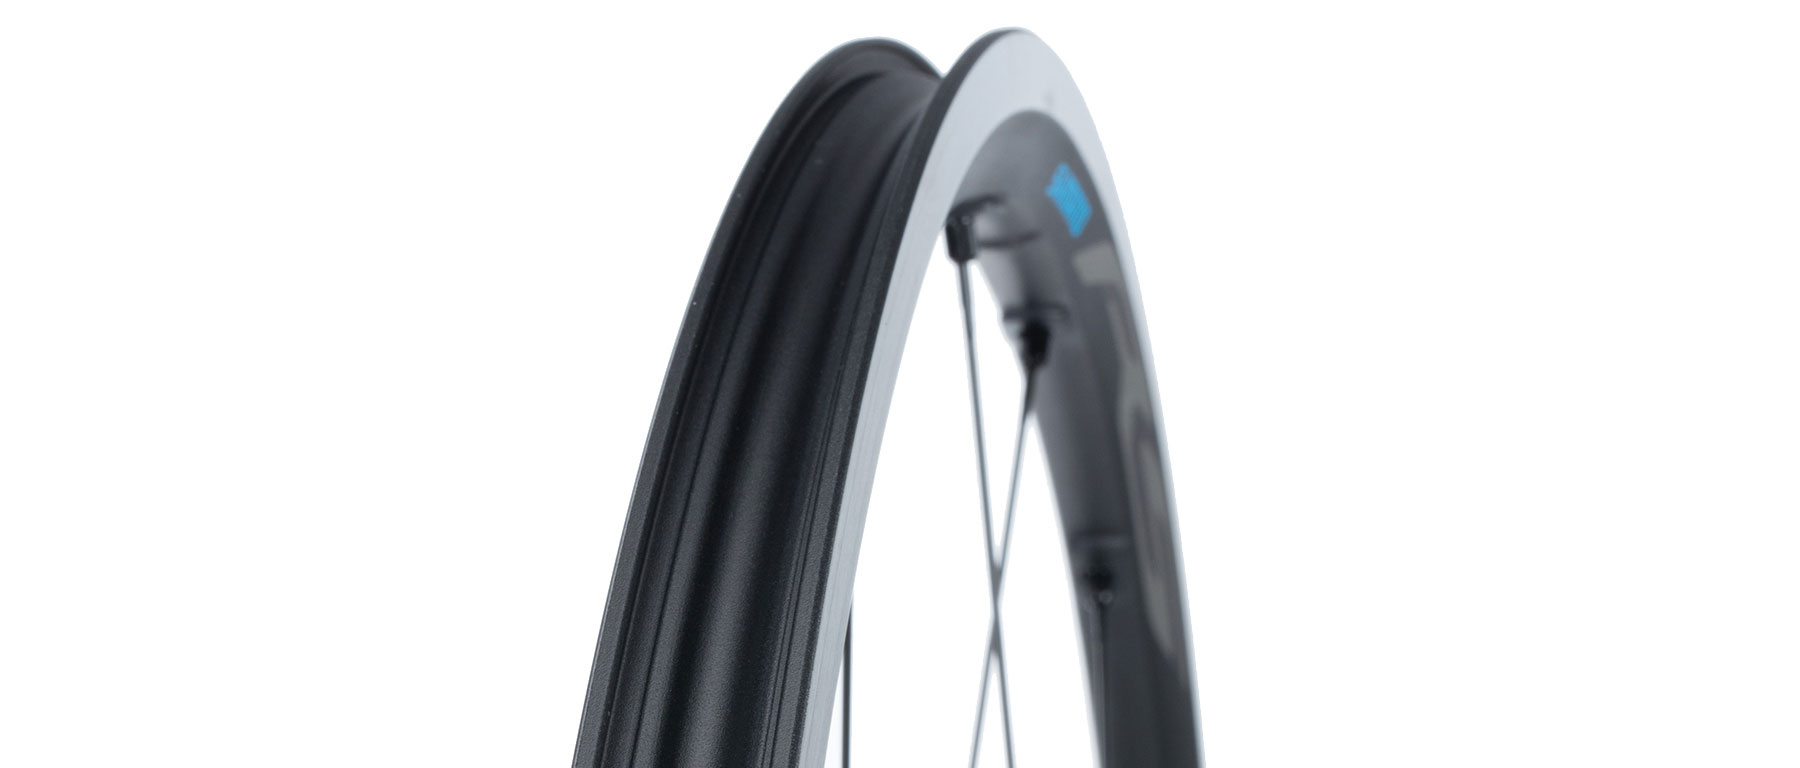 Shimano WH-RS500-TL Wheelset